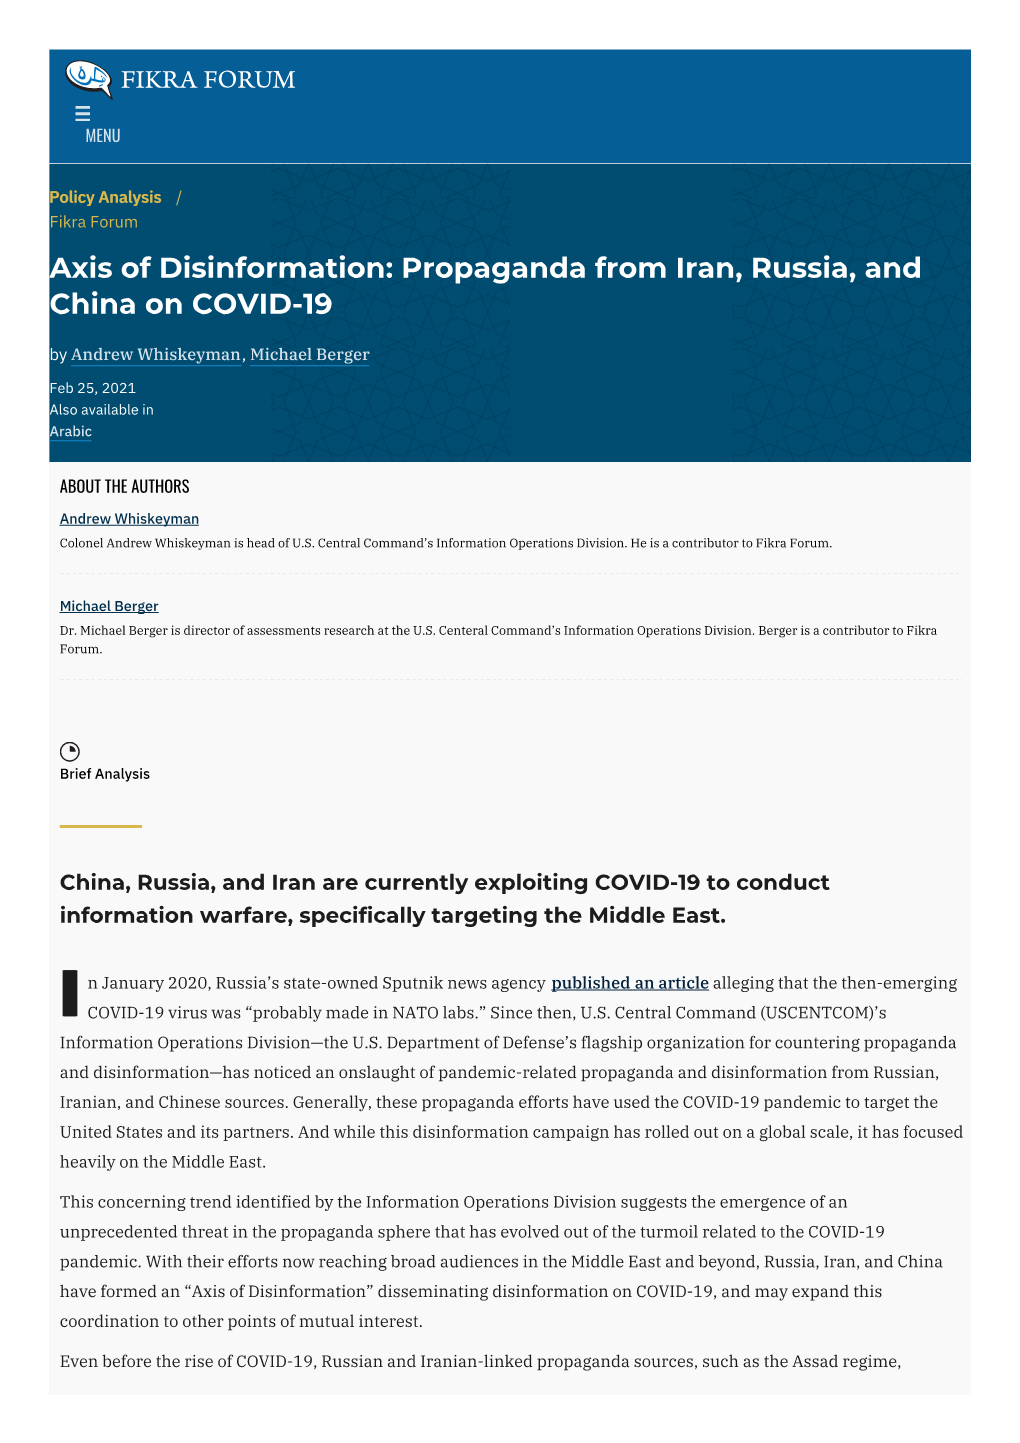 Axis of Disinformation: Propaganda from Iran, Russia, and China on COVID-19 by Andrew Whiskeyman, Michael Berger